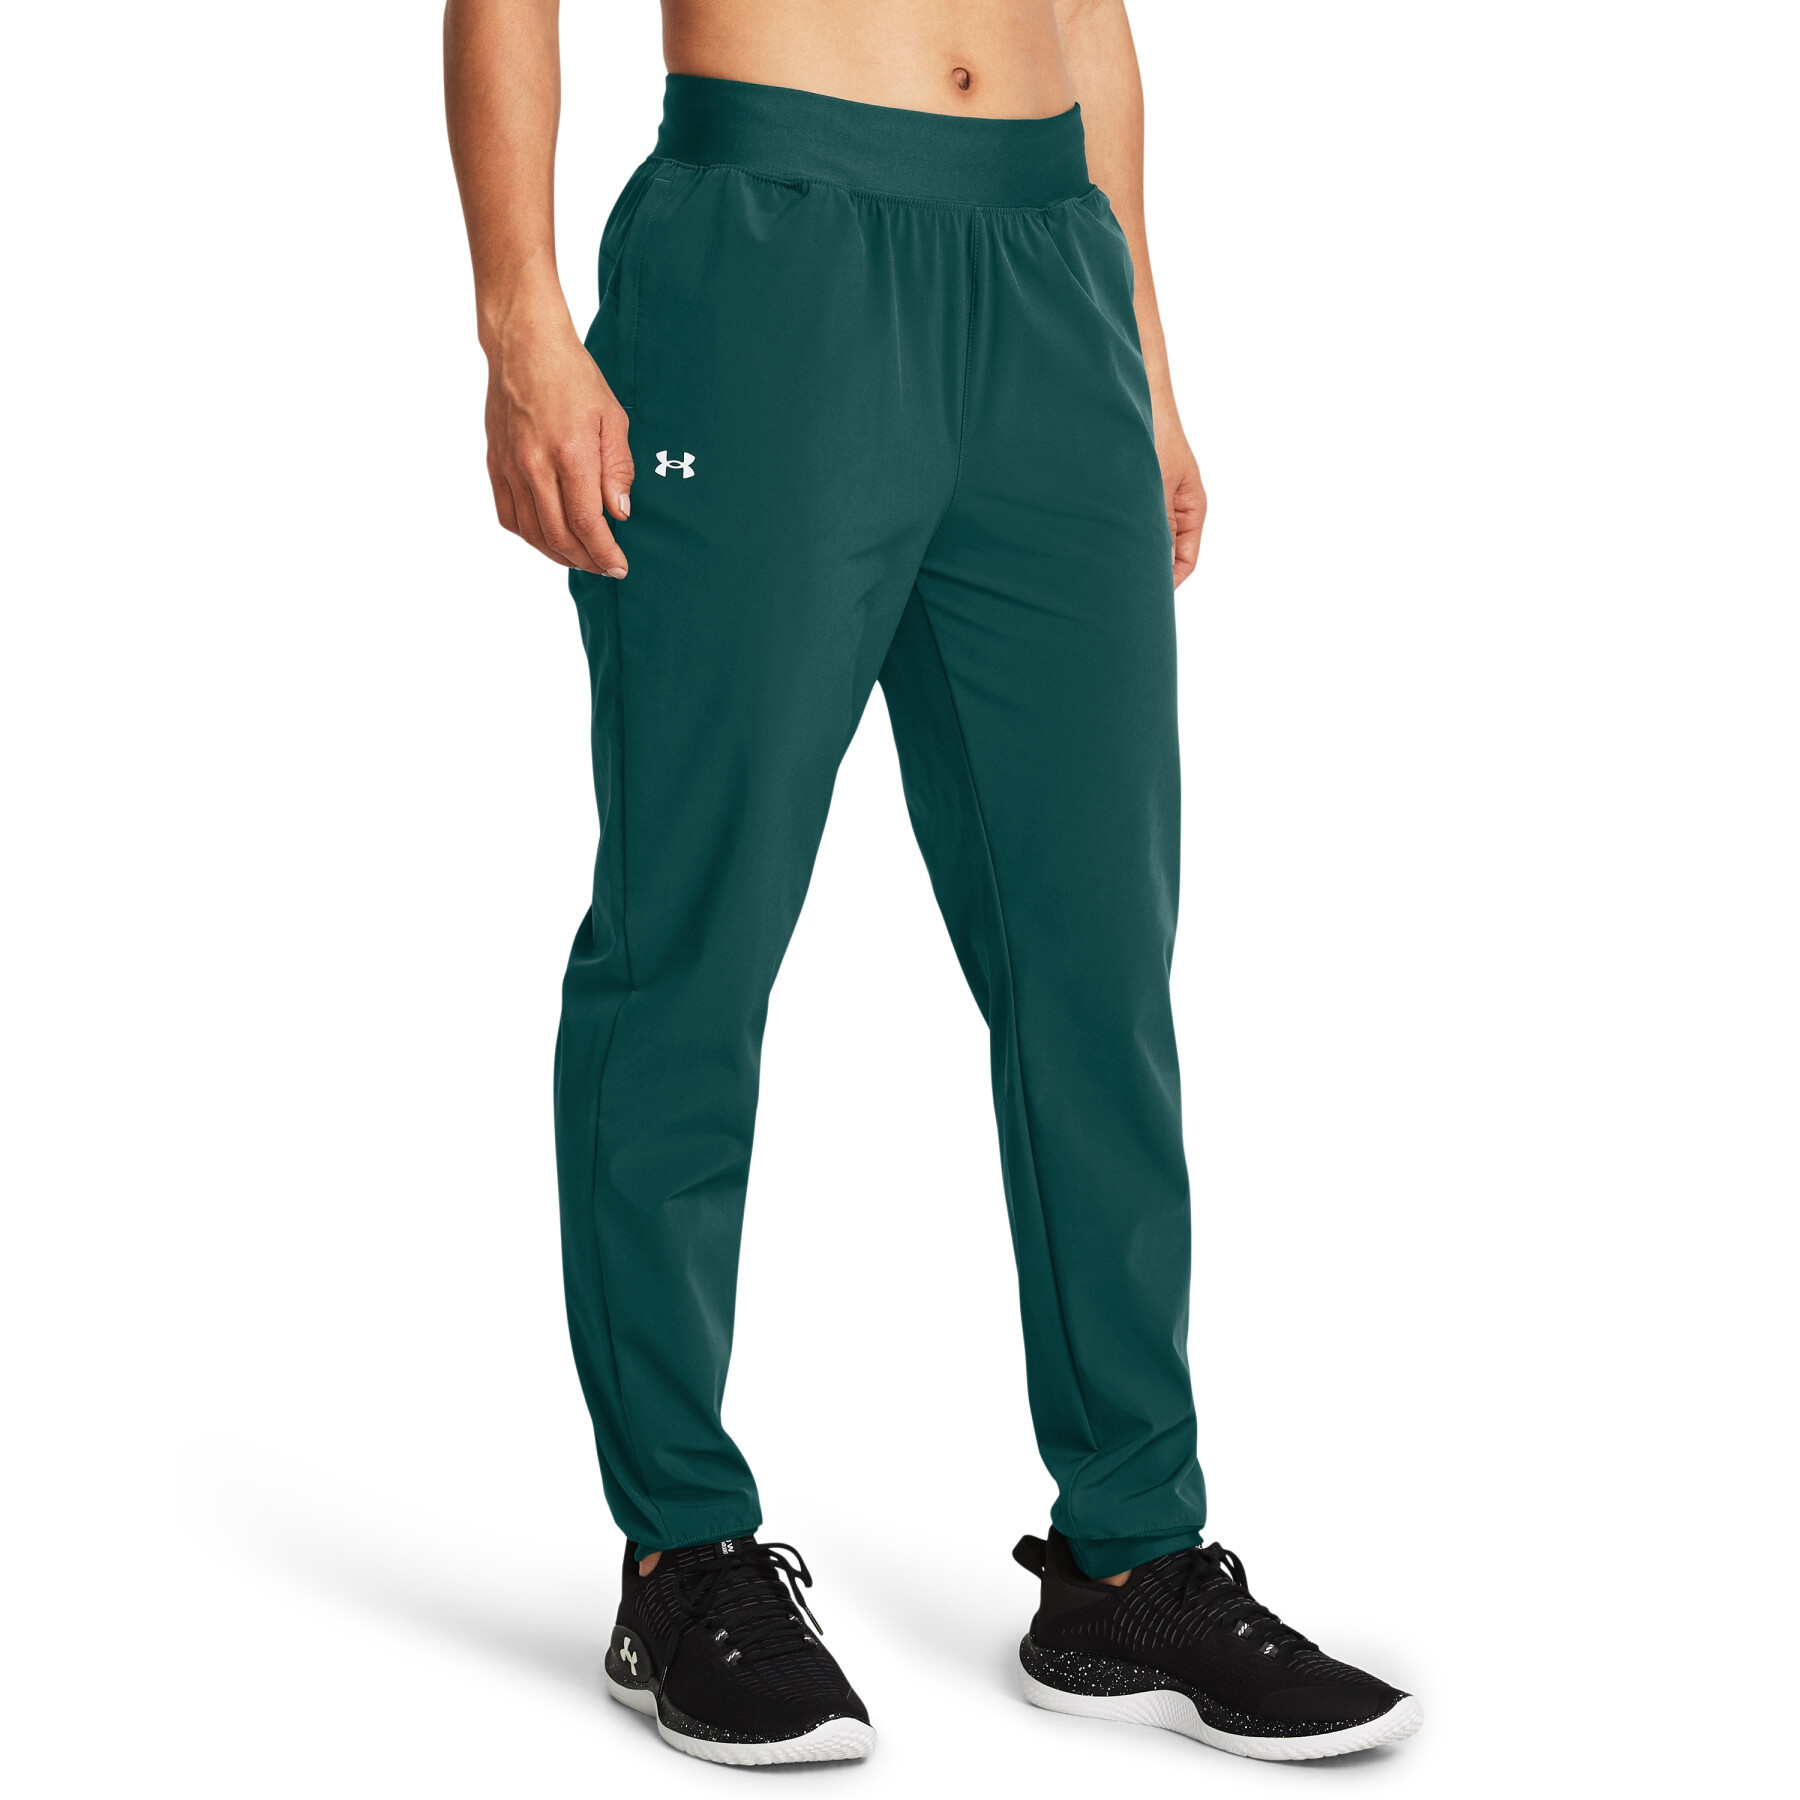 Women's high-waisted jogging suit Under Armour Rival